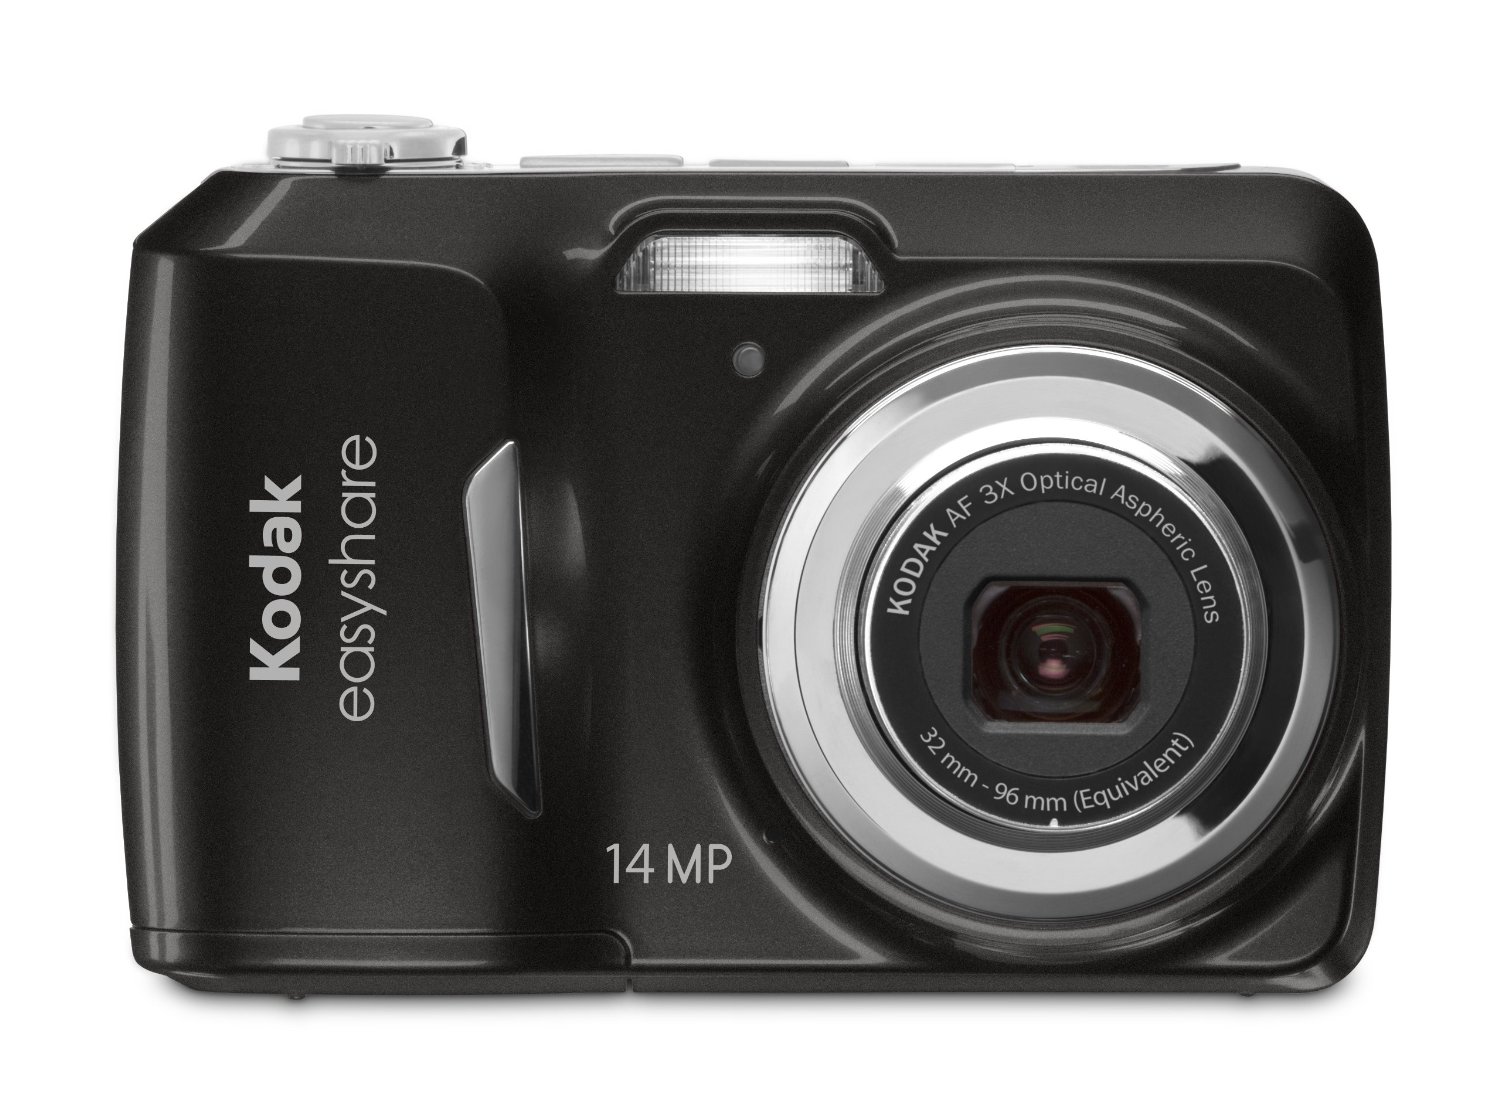 Kodak EasyShare C1530 14 MP Digital Camera with 3x Optical Zoom and 3.0-Inch LCD (Black)